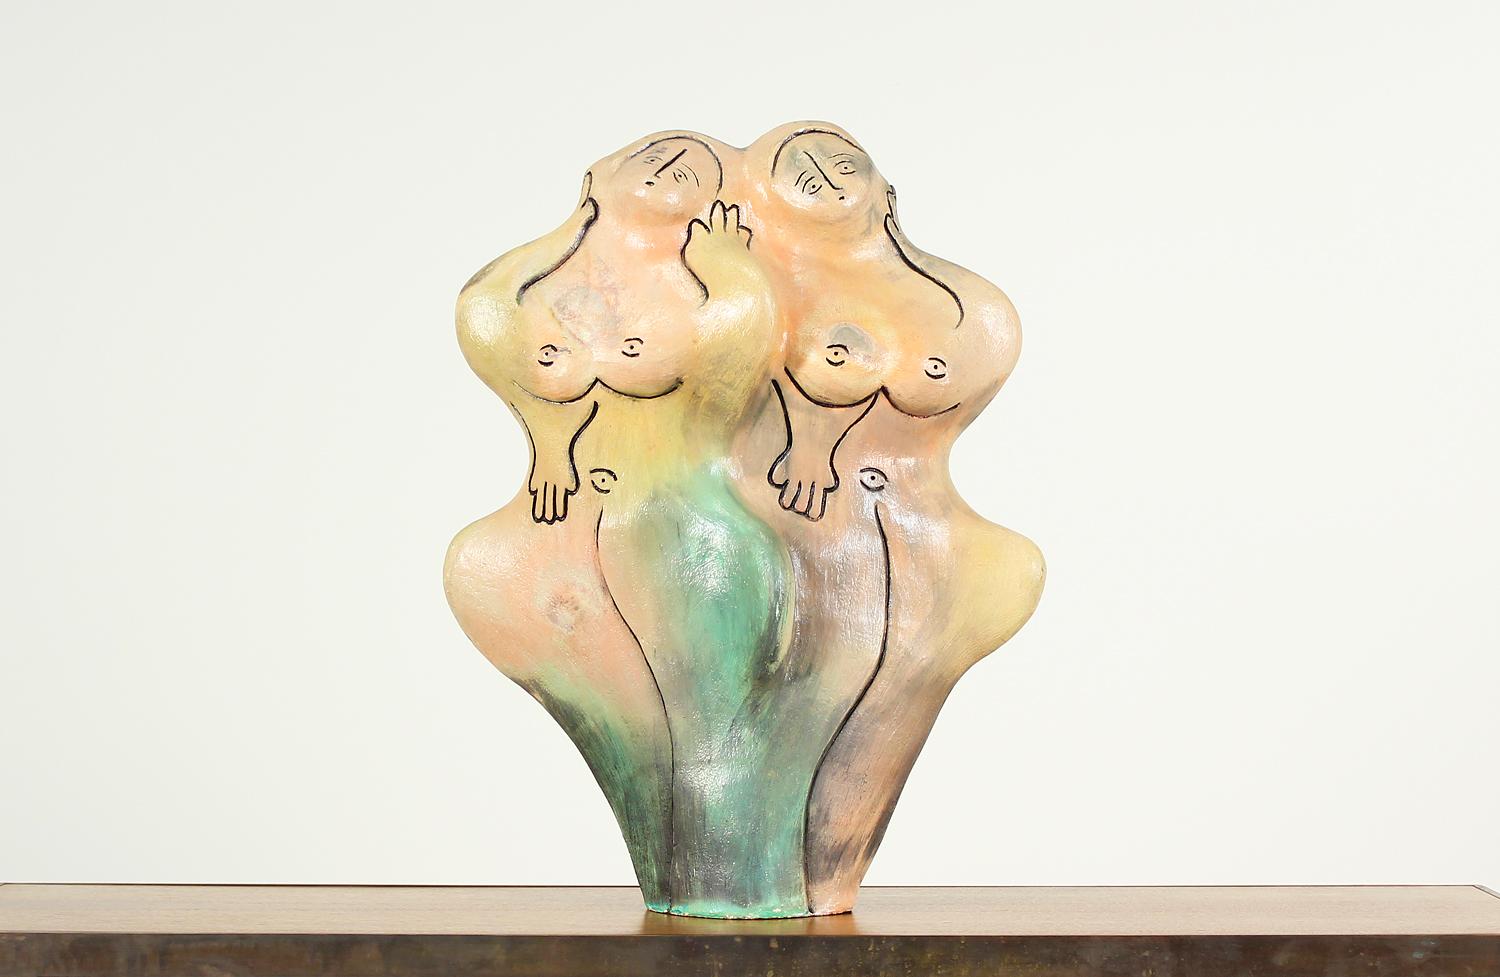 Large free-form female sculpture designed in the United States circa 1960. This interesting art piece features two entwined nude women in earth-toned ceramic. Black lines trace their faces, hands, and bodies. Their facial expressions and body